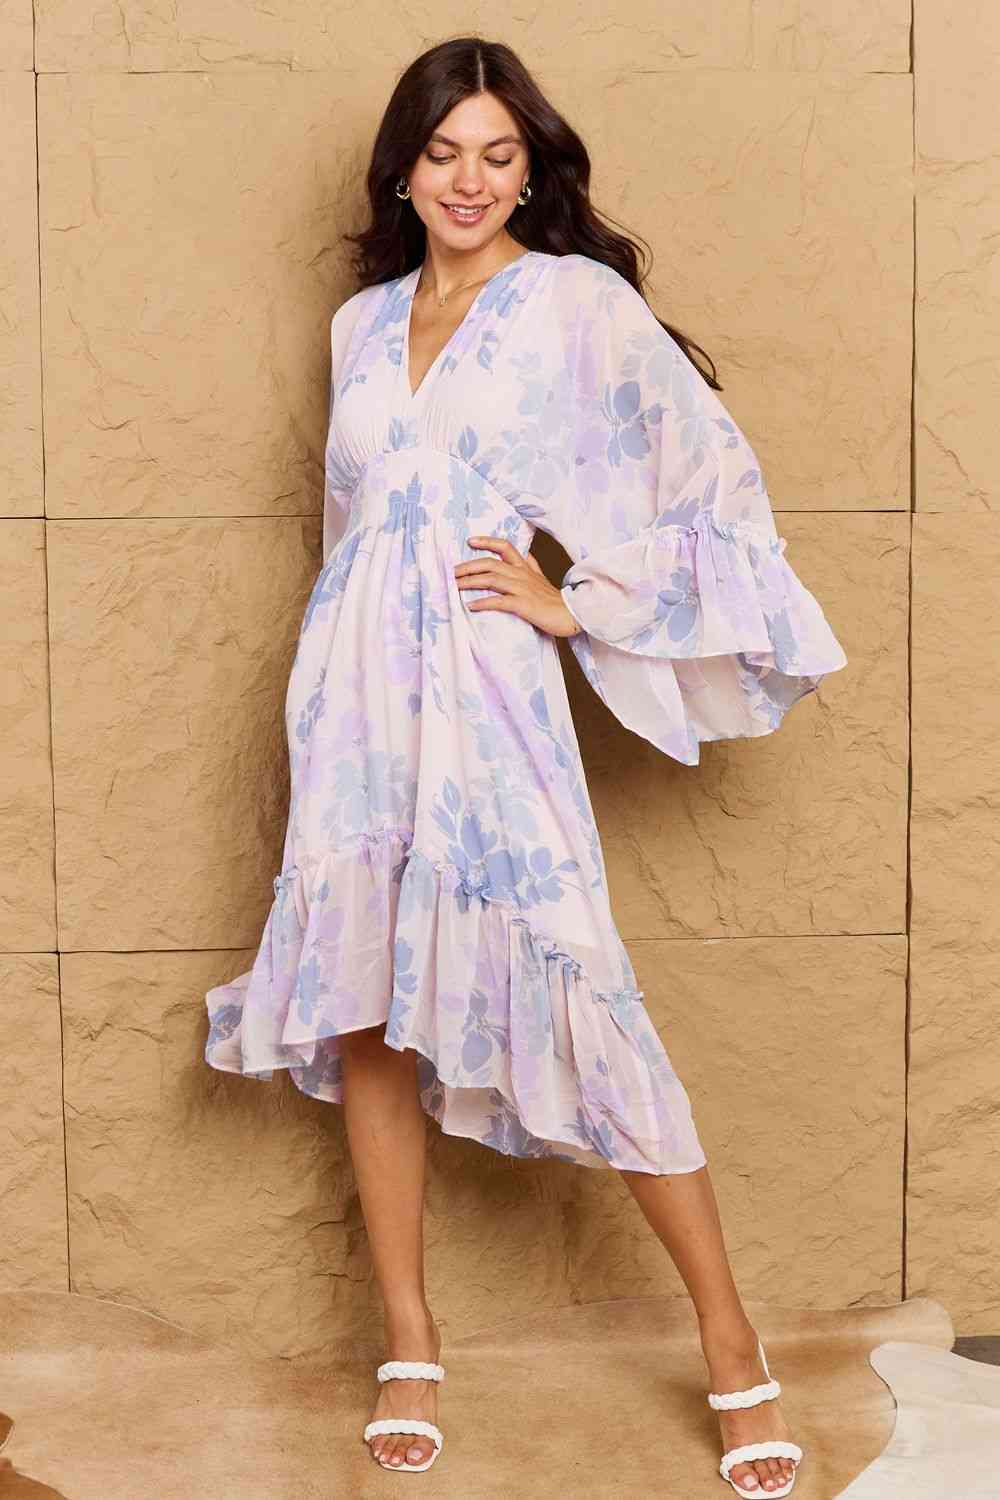 Take Me With You Floral Bell Sleeve Midi Dress in Blue - All Dresses - Dresses - 3 - 2024